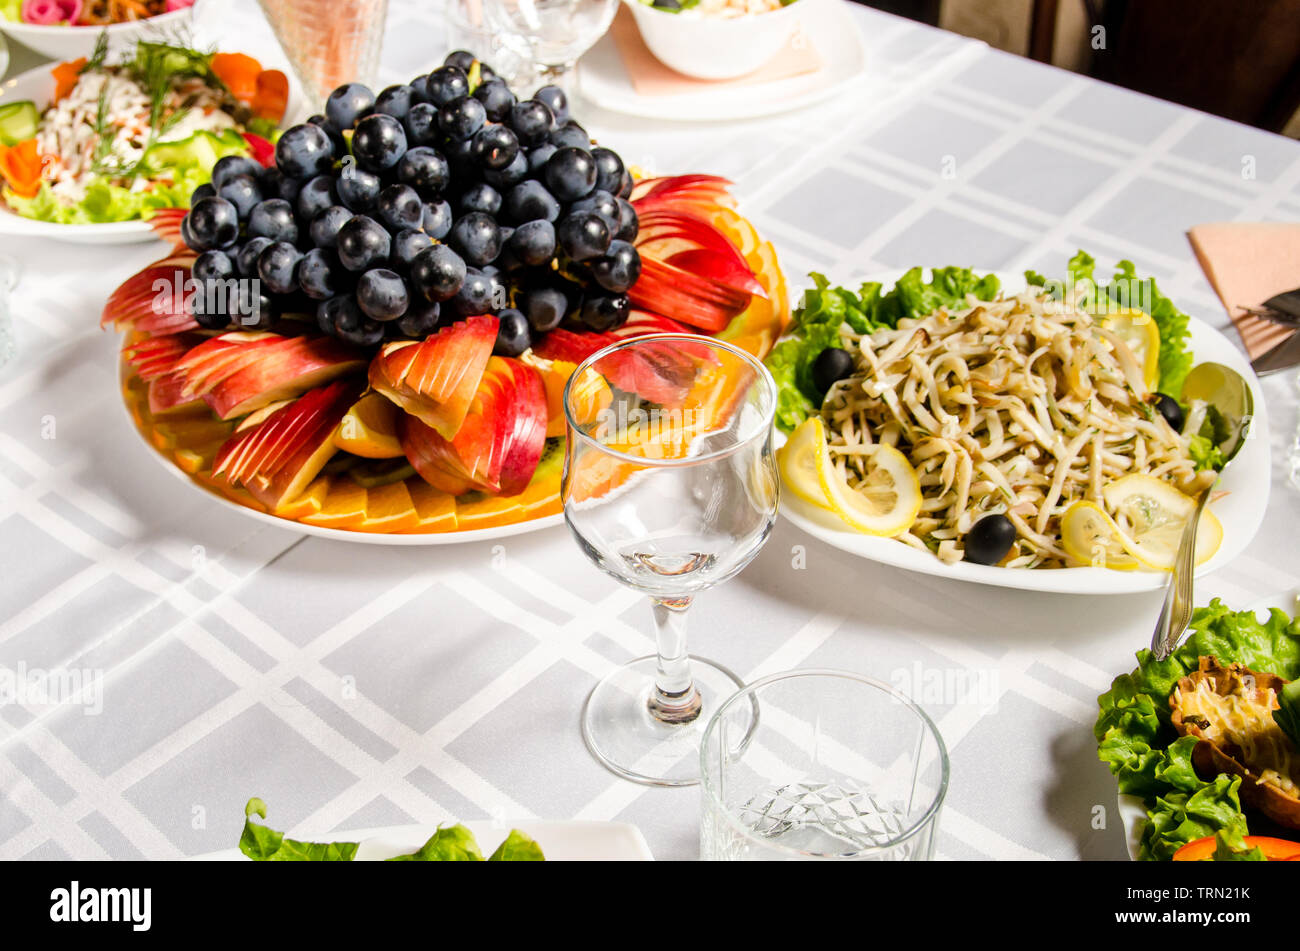 table lined with variety of dishes from which the centerpiece is dish with sliced fruit. Stock Photo